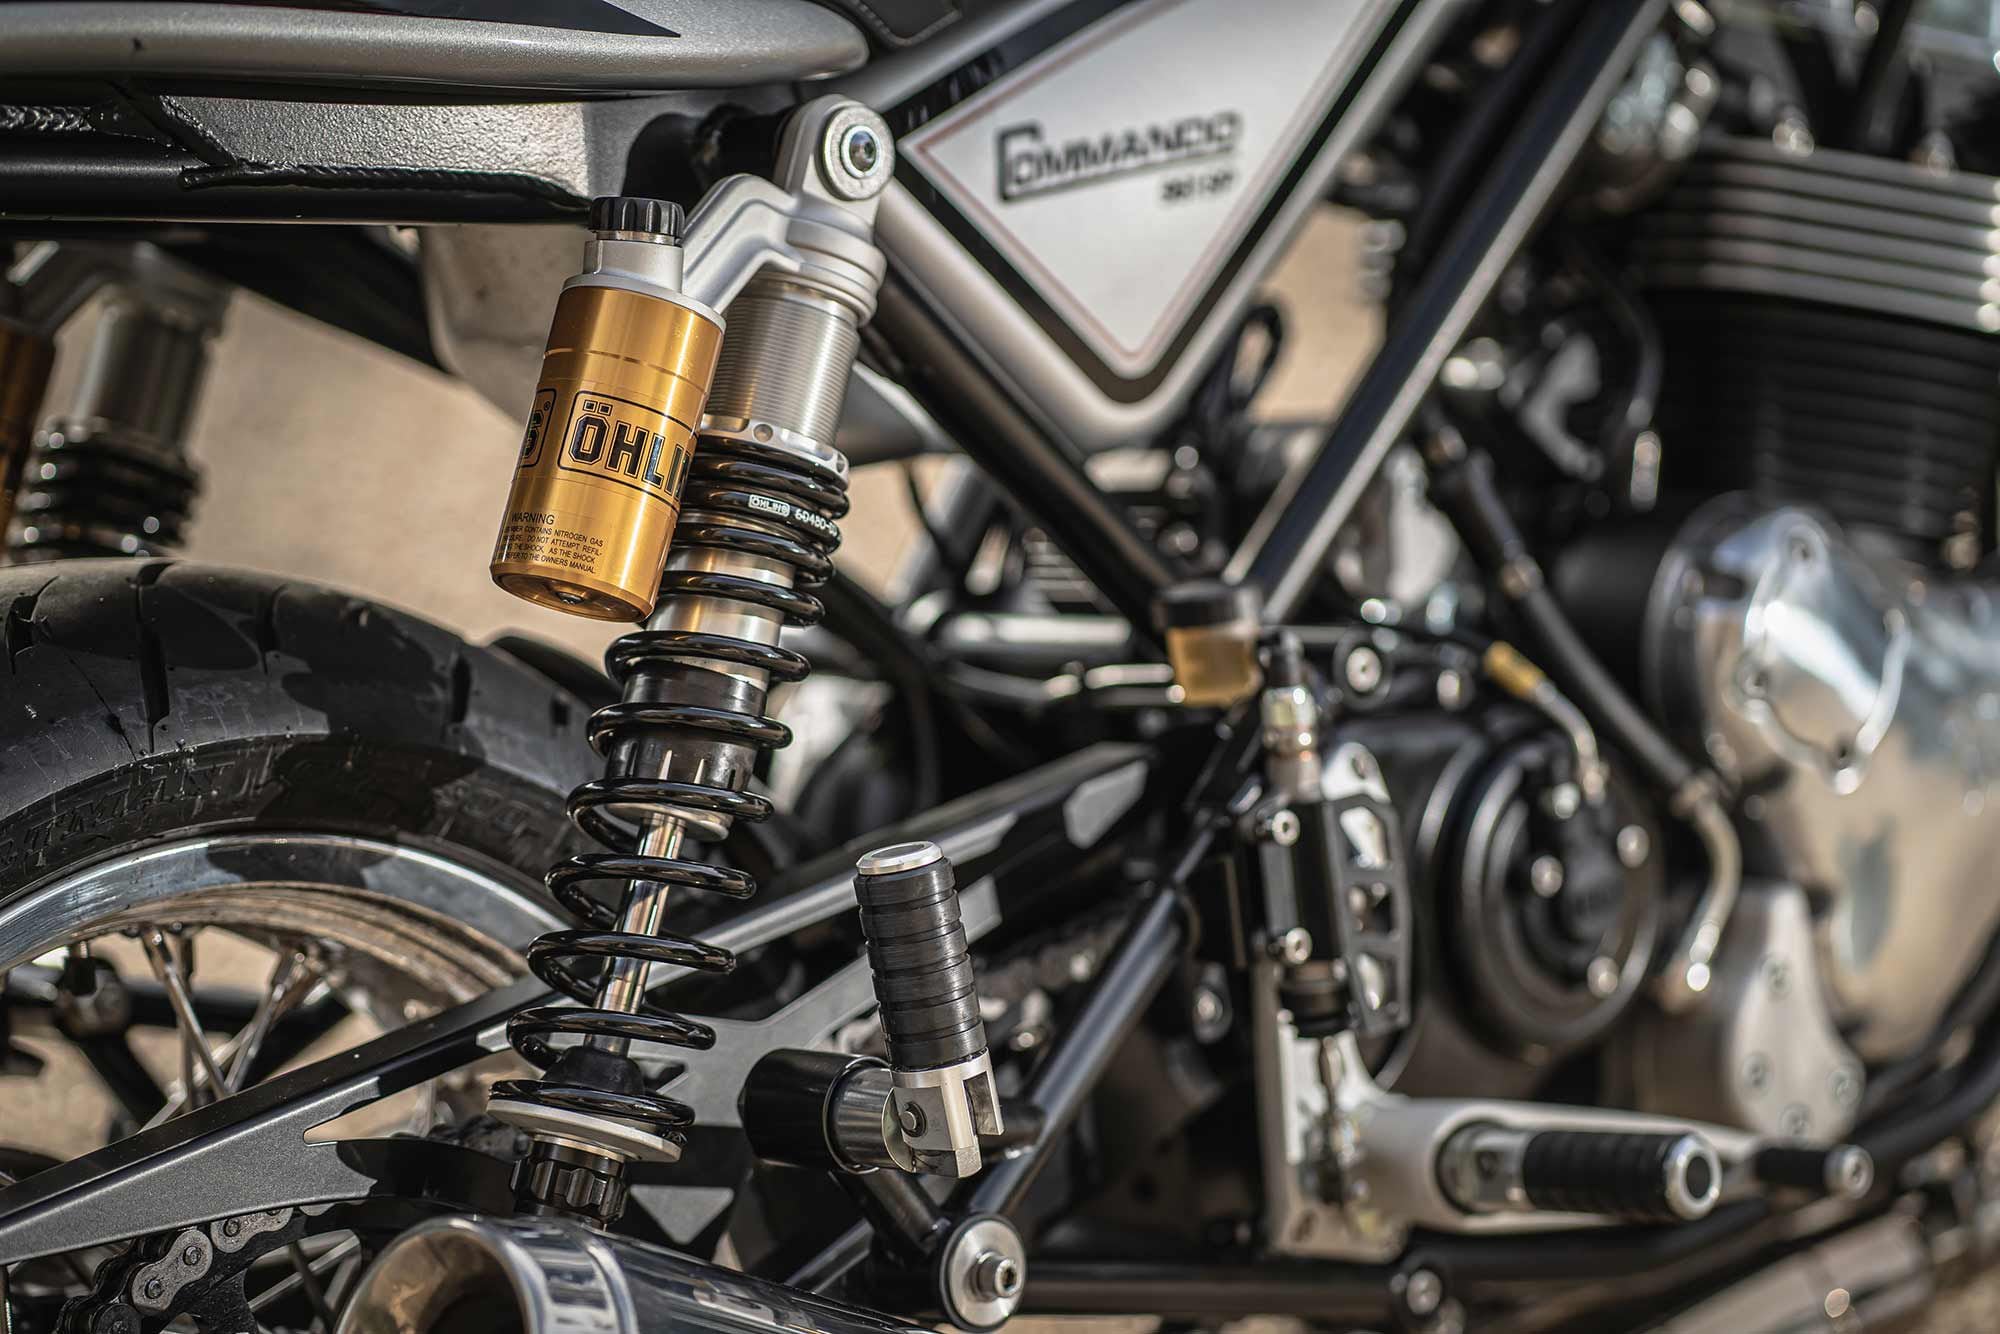 While soft, the Öhlins suspension and tubular steel chassis handle road imperfections without a fuss.